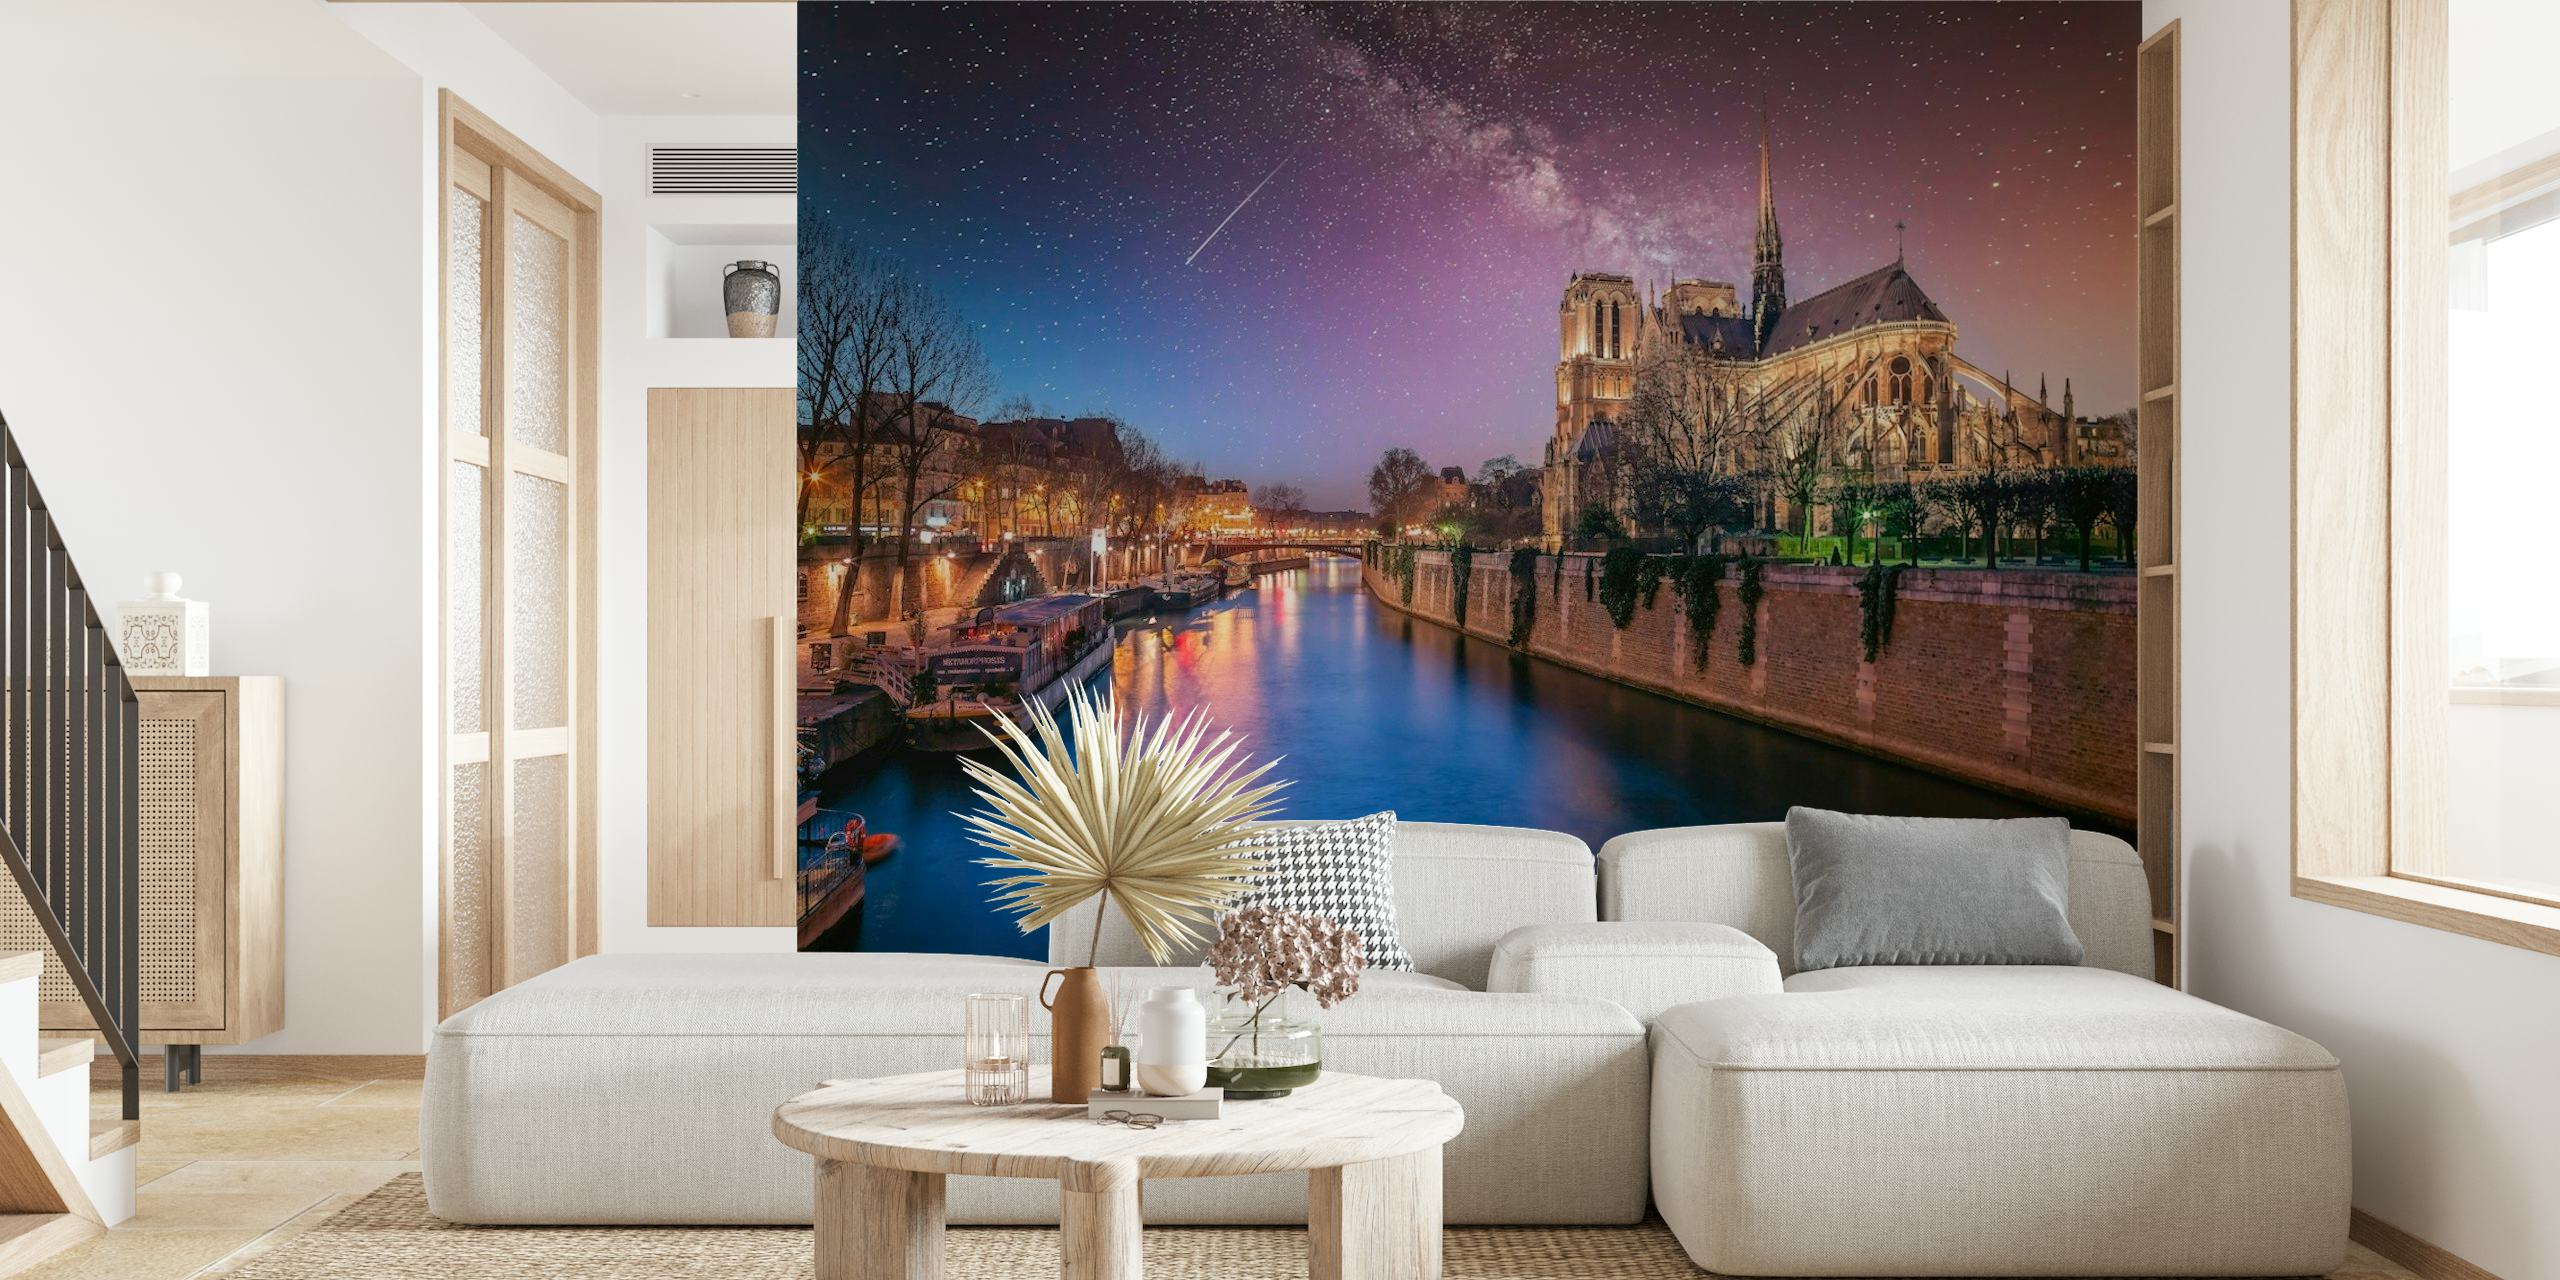 Notre-Dame cathedral against a starry night sky with the Seine River in the foreground.